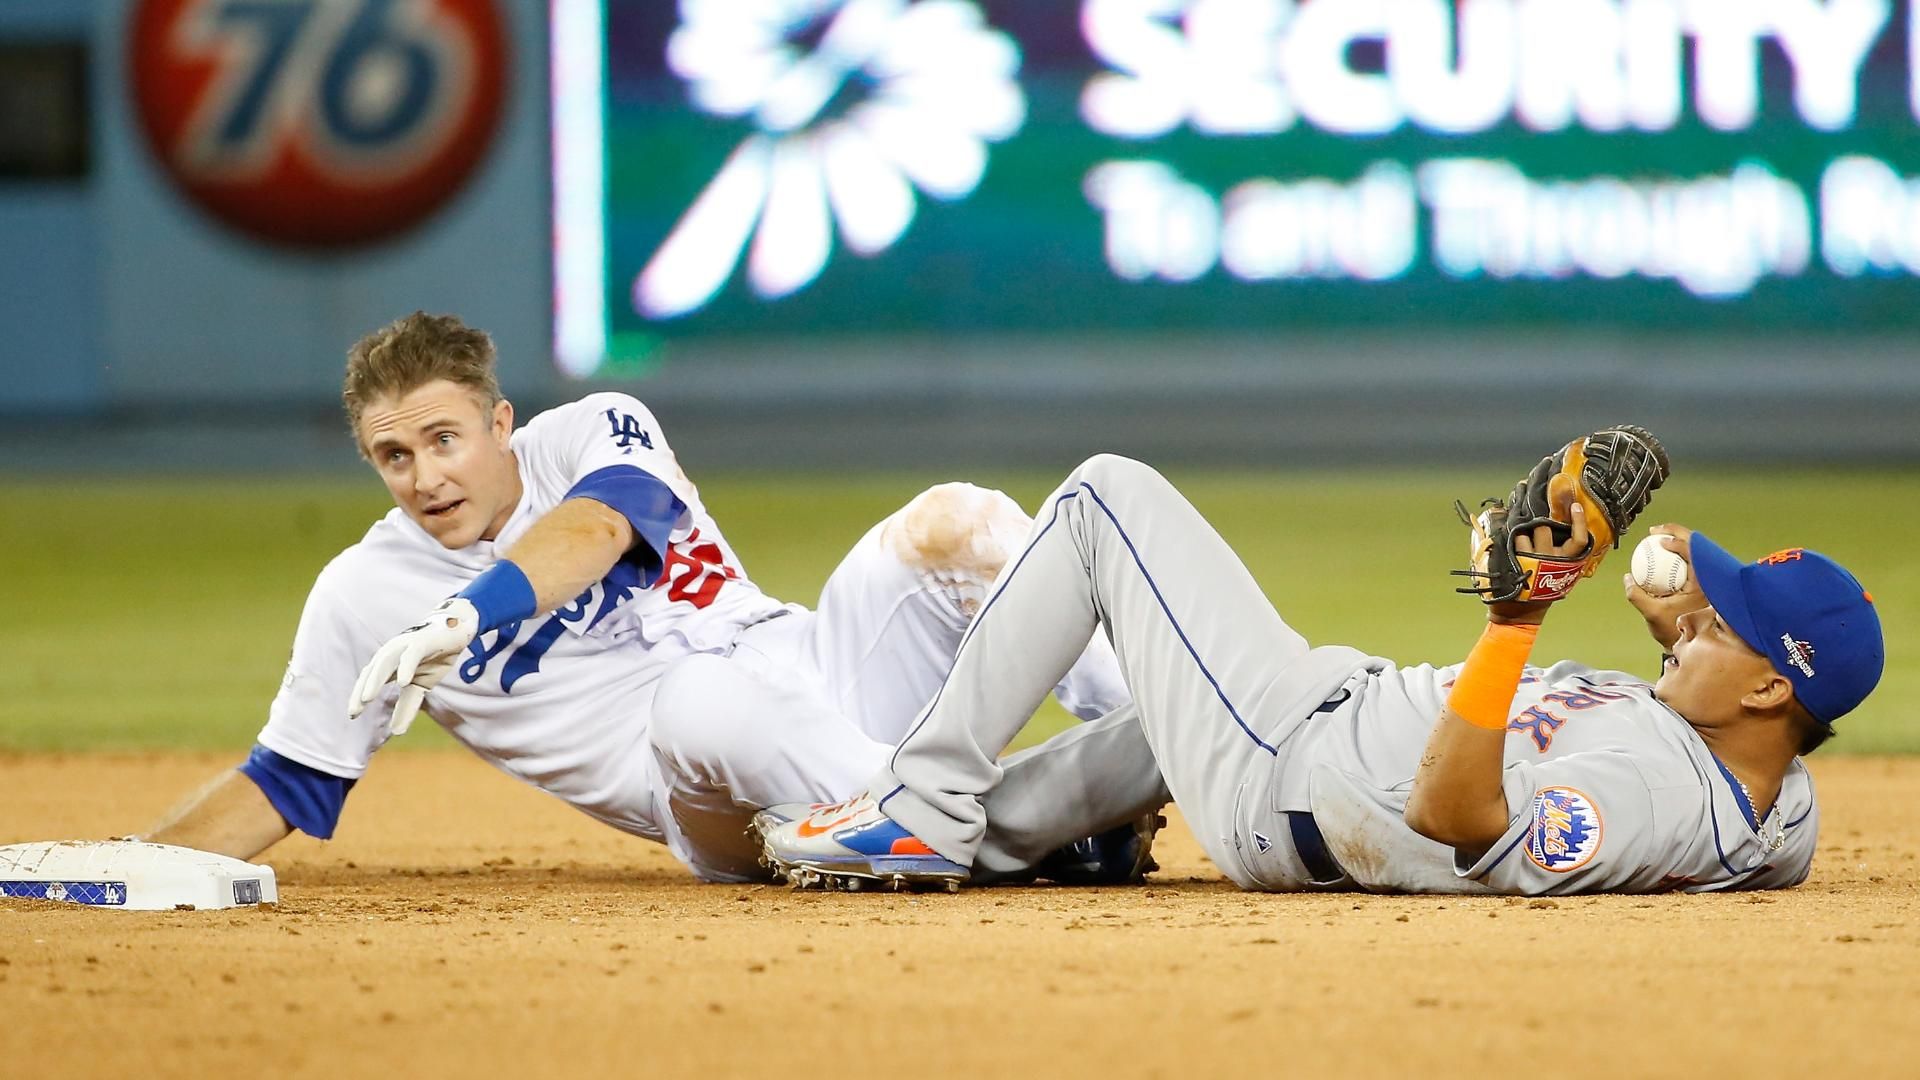 Hard-nosed or dirty play from Utley?